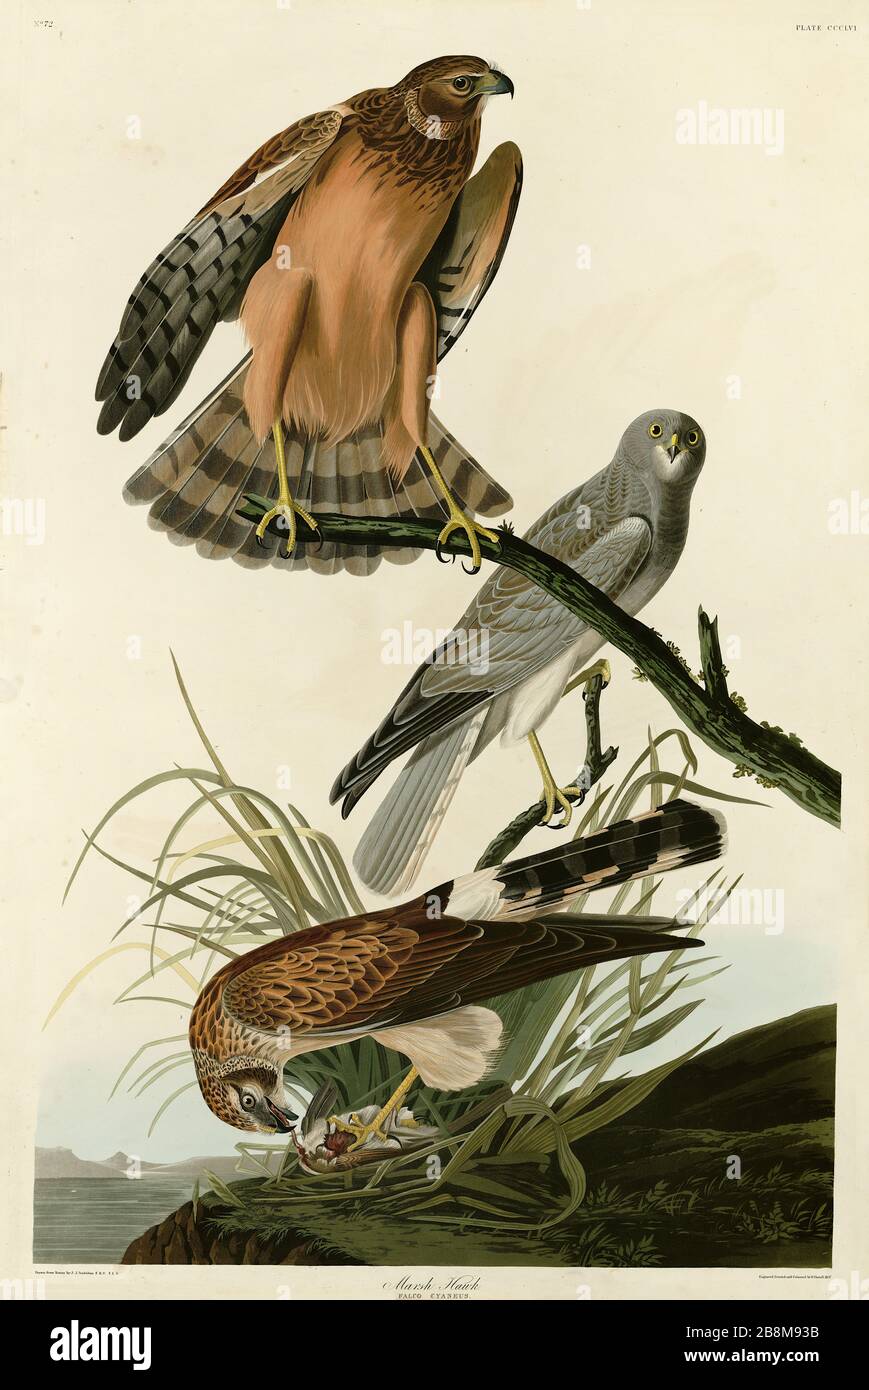 Plate 356 Marsh Hawk (Northern Harrier) from The Birds of America folio (1827–1839) by John James Audubon - Very high resolution quality edited image Stock Photo